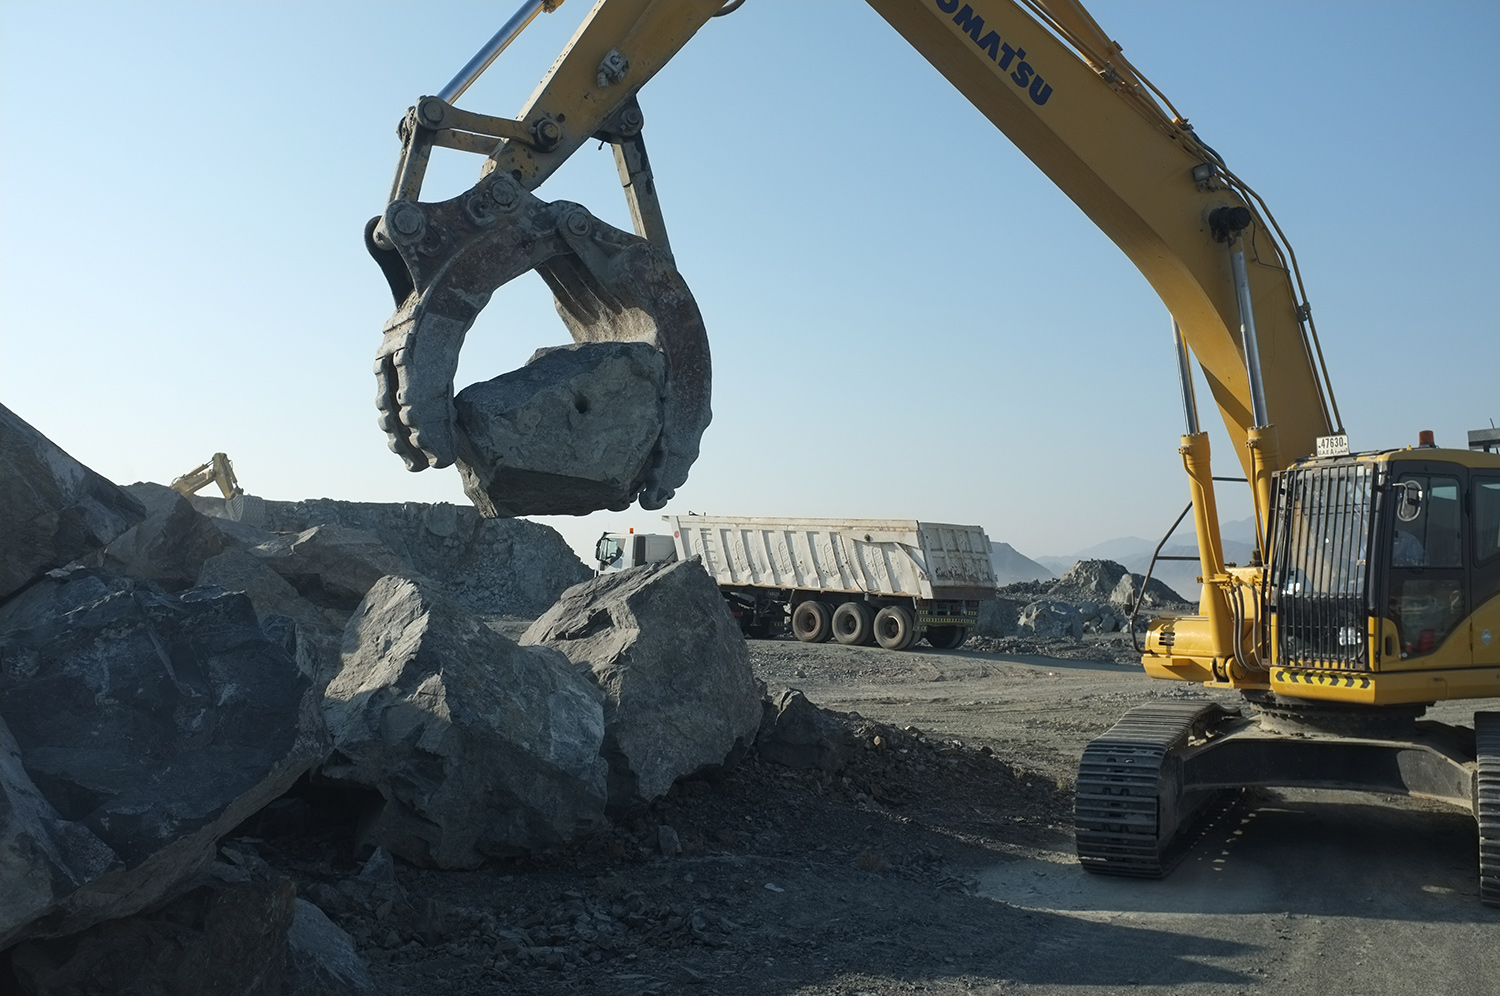  Collecting boulders for installation  Quarry yard, Fujairah 